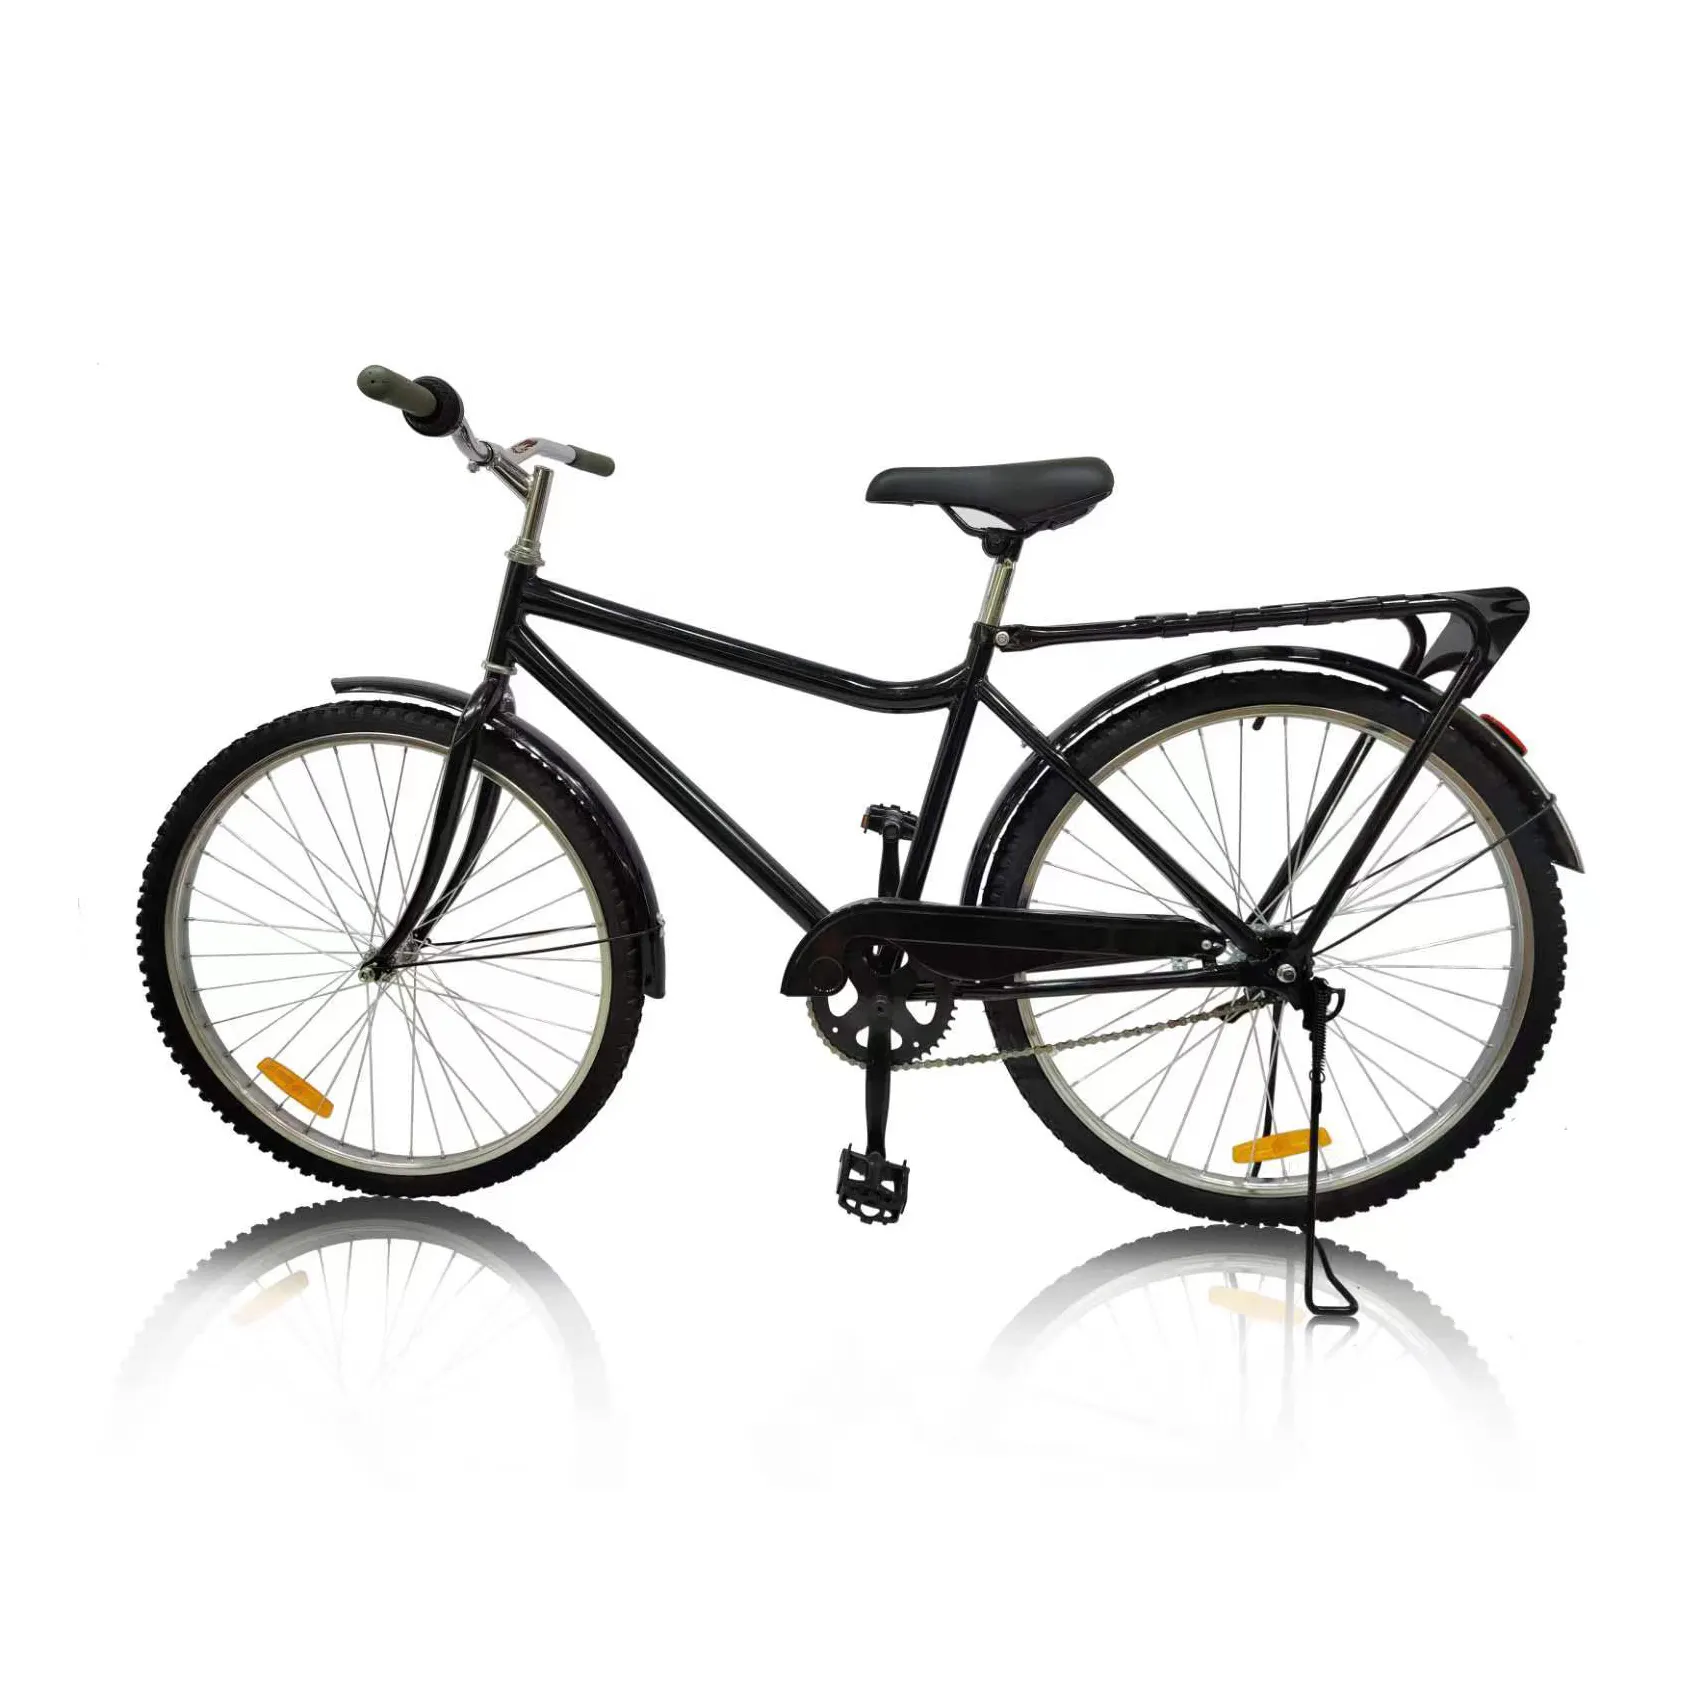 China Factory Supply High Quality 26 Inch 7 Speed Fashional Class Ladies And Men Adult City Bike Cycle Bicicleta